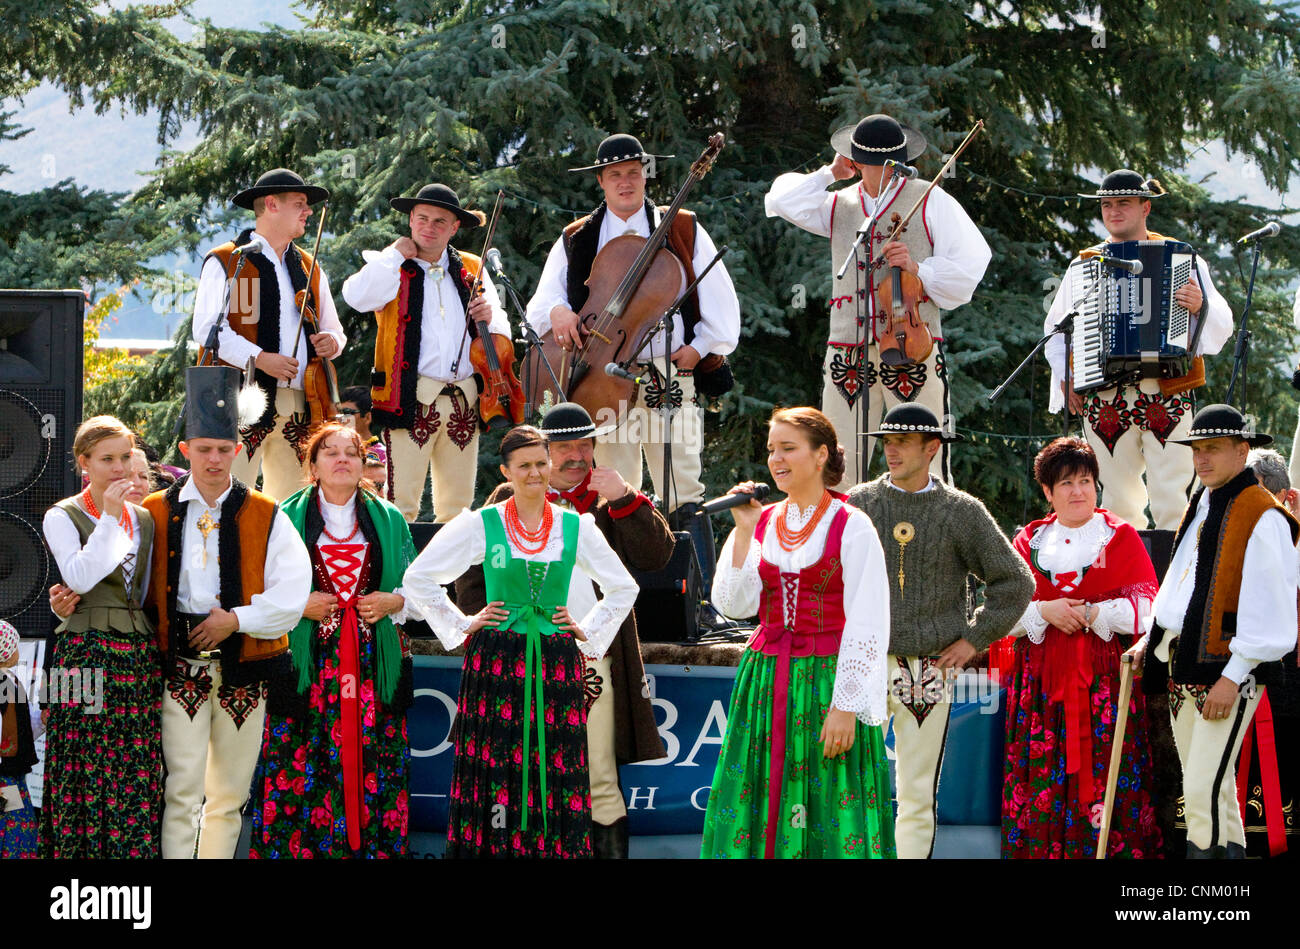 Polish Highlanders folk dancers and musicians perform at the Trailing of the Sheep Festival in Hailey, Idaho, USA. Stock Photo